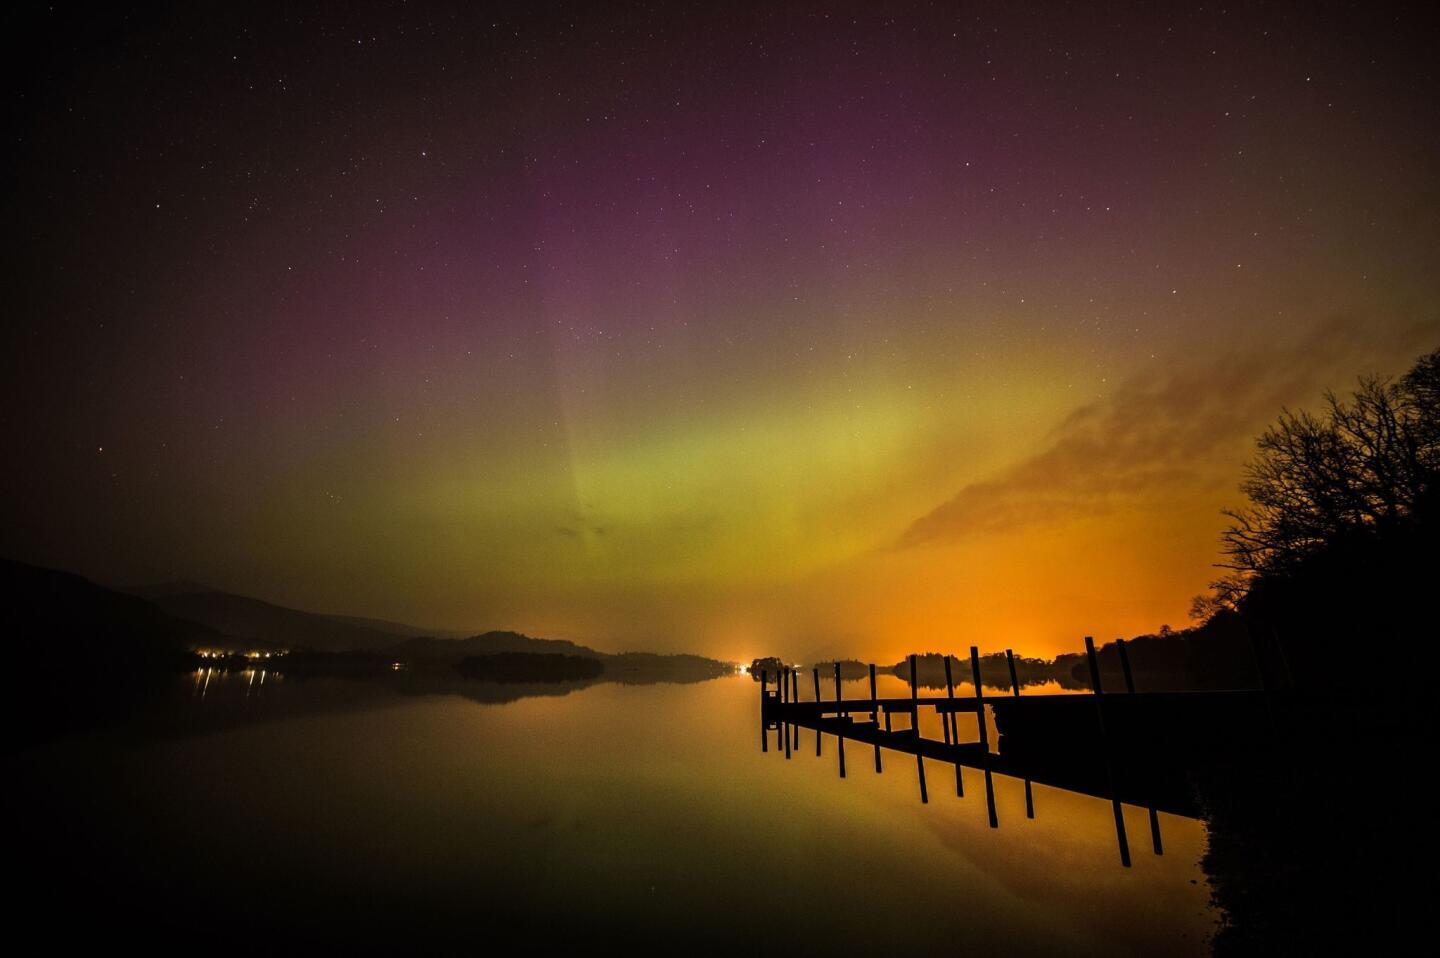 The northern lights over Derwent water near Keswick, England, on March 17.